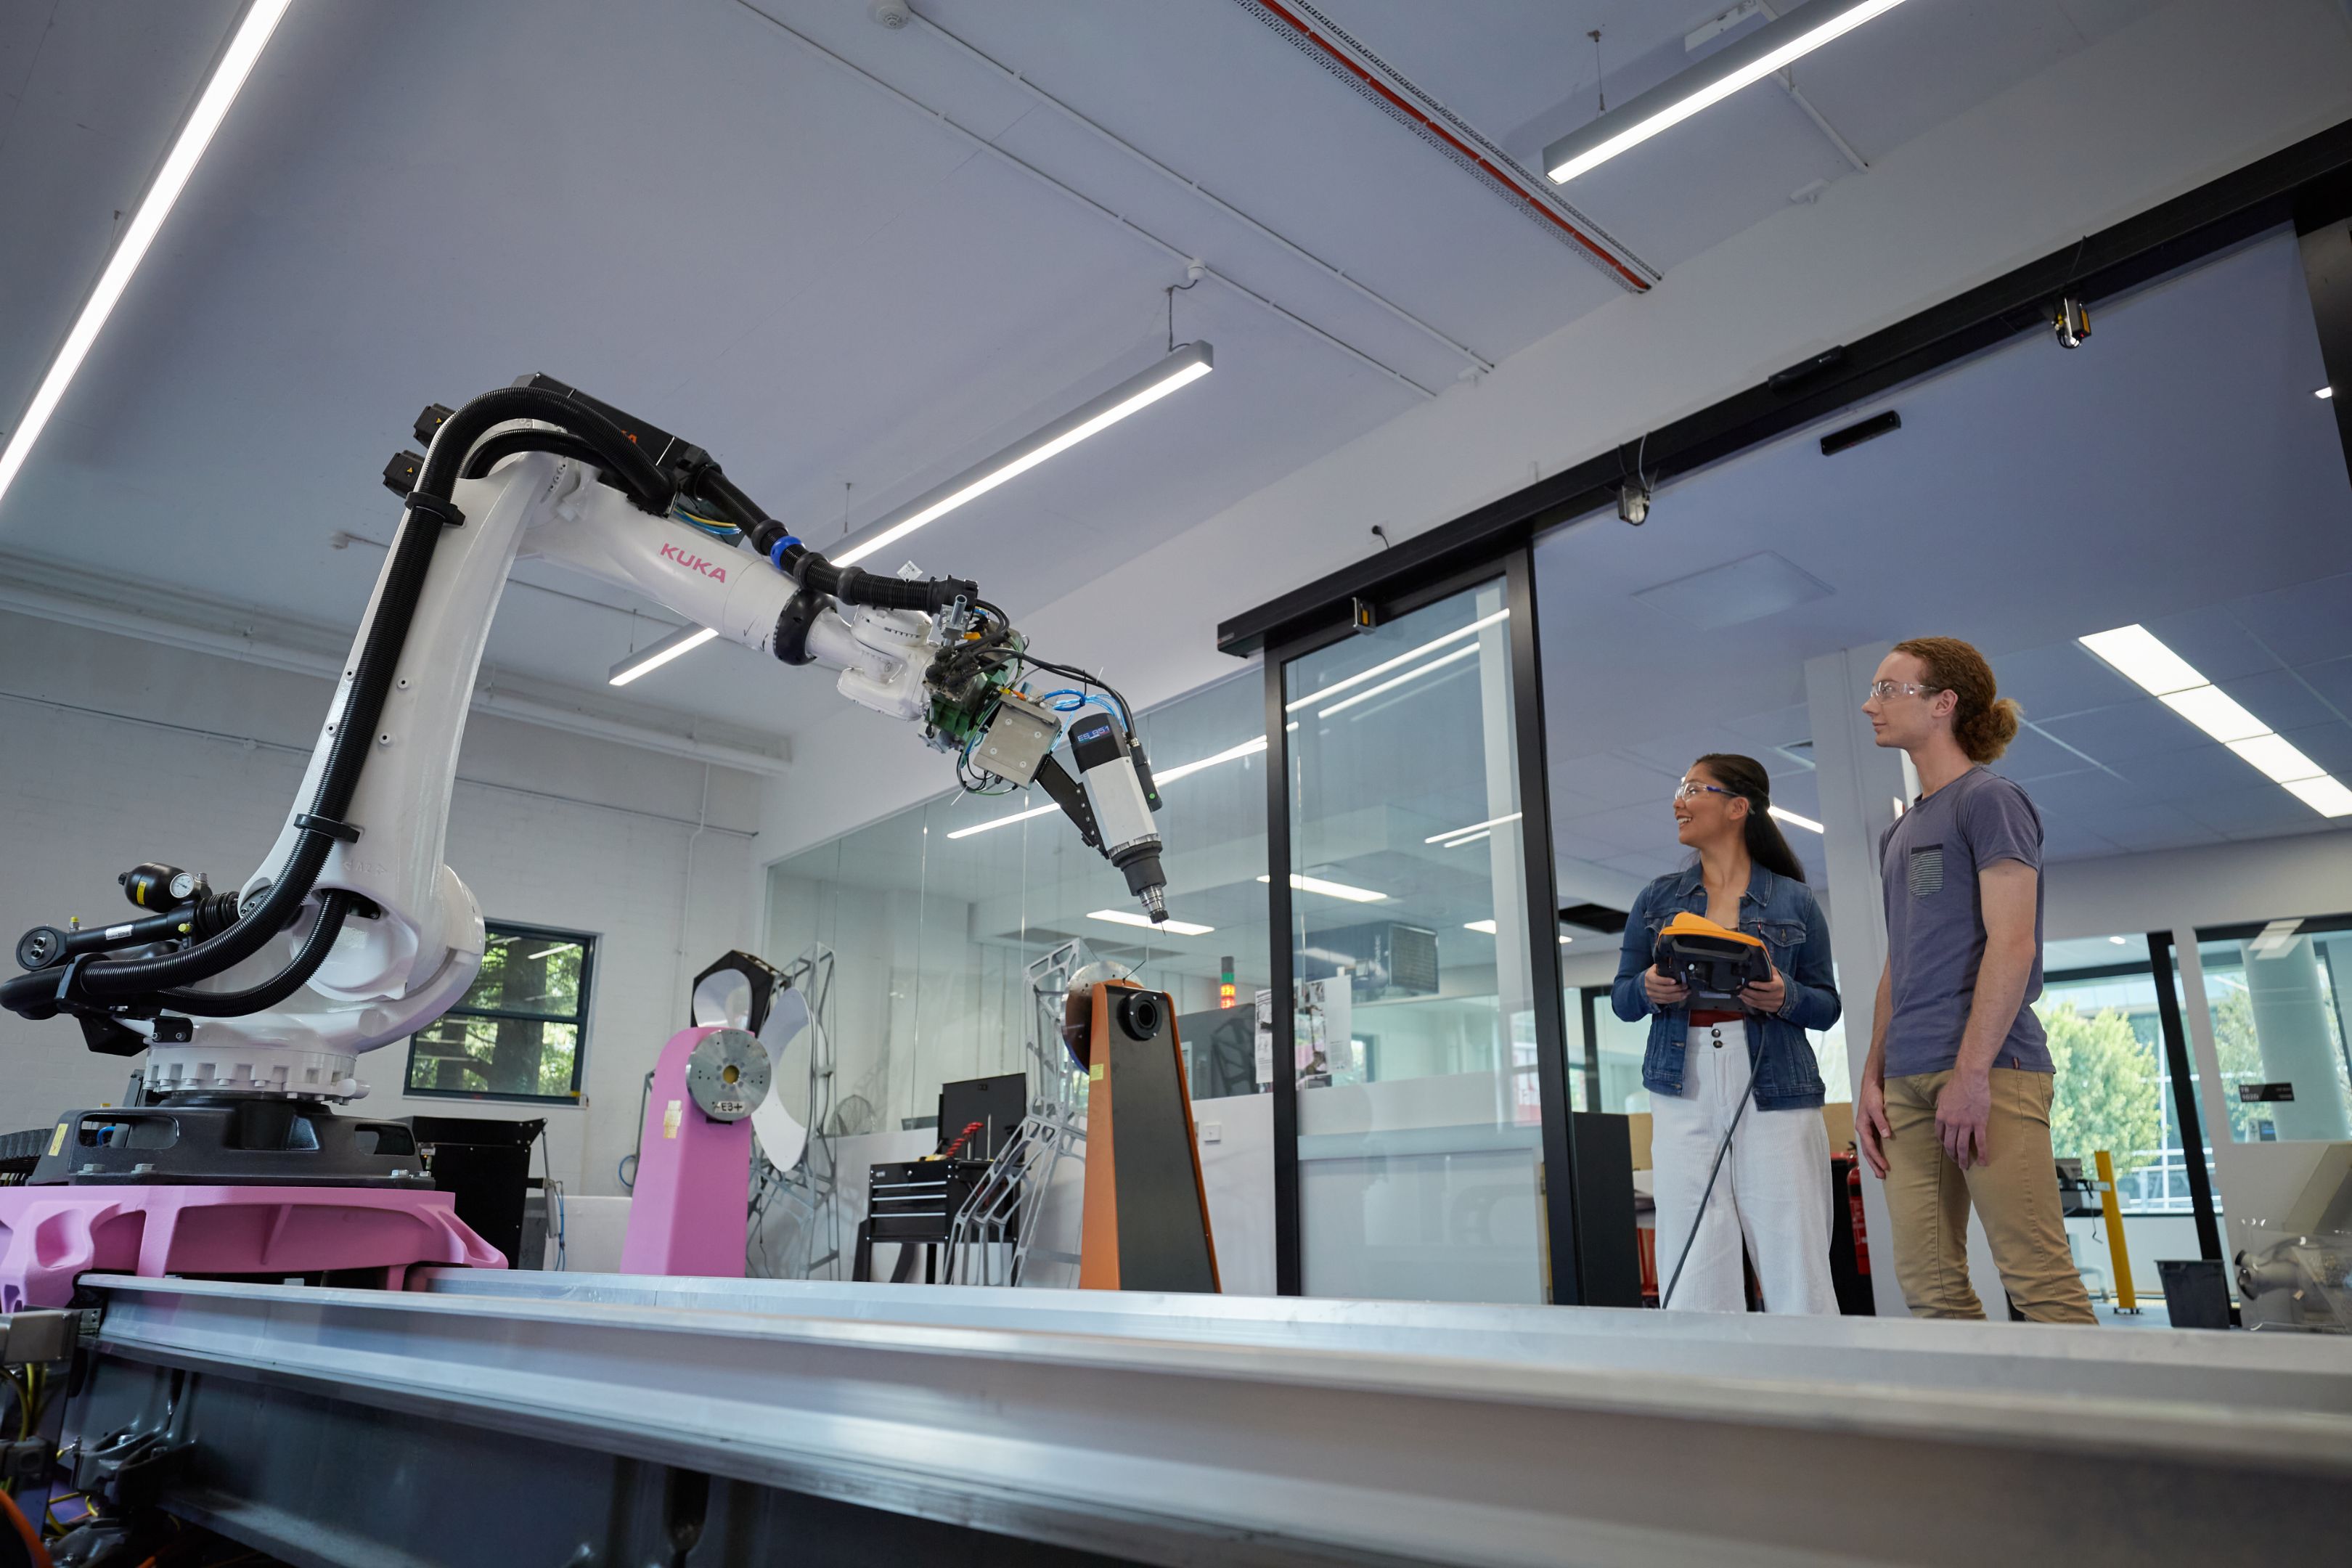 Male and female student in Protolab standing next to Kuka robotic arm